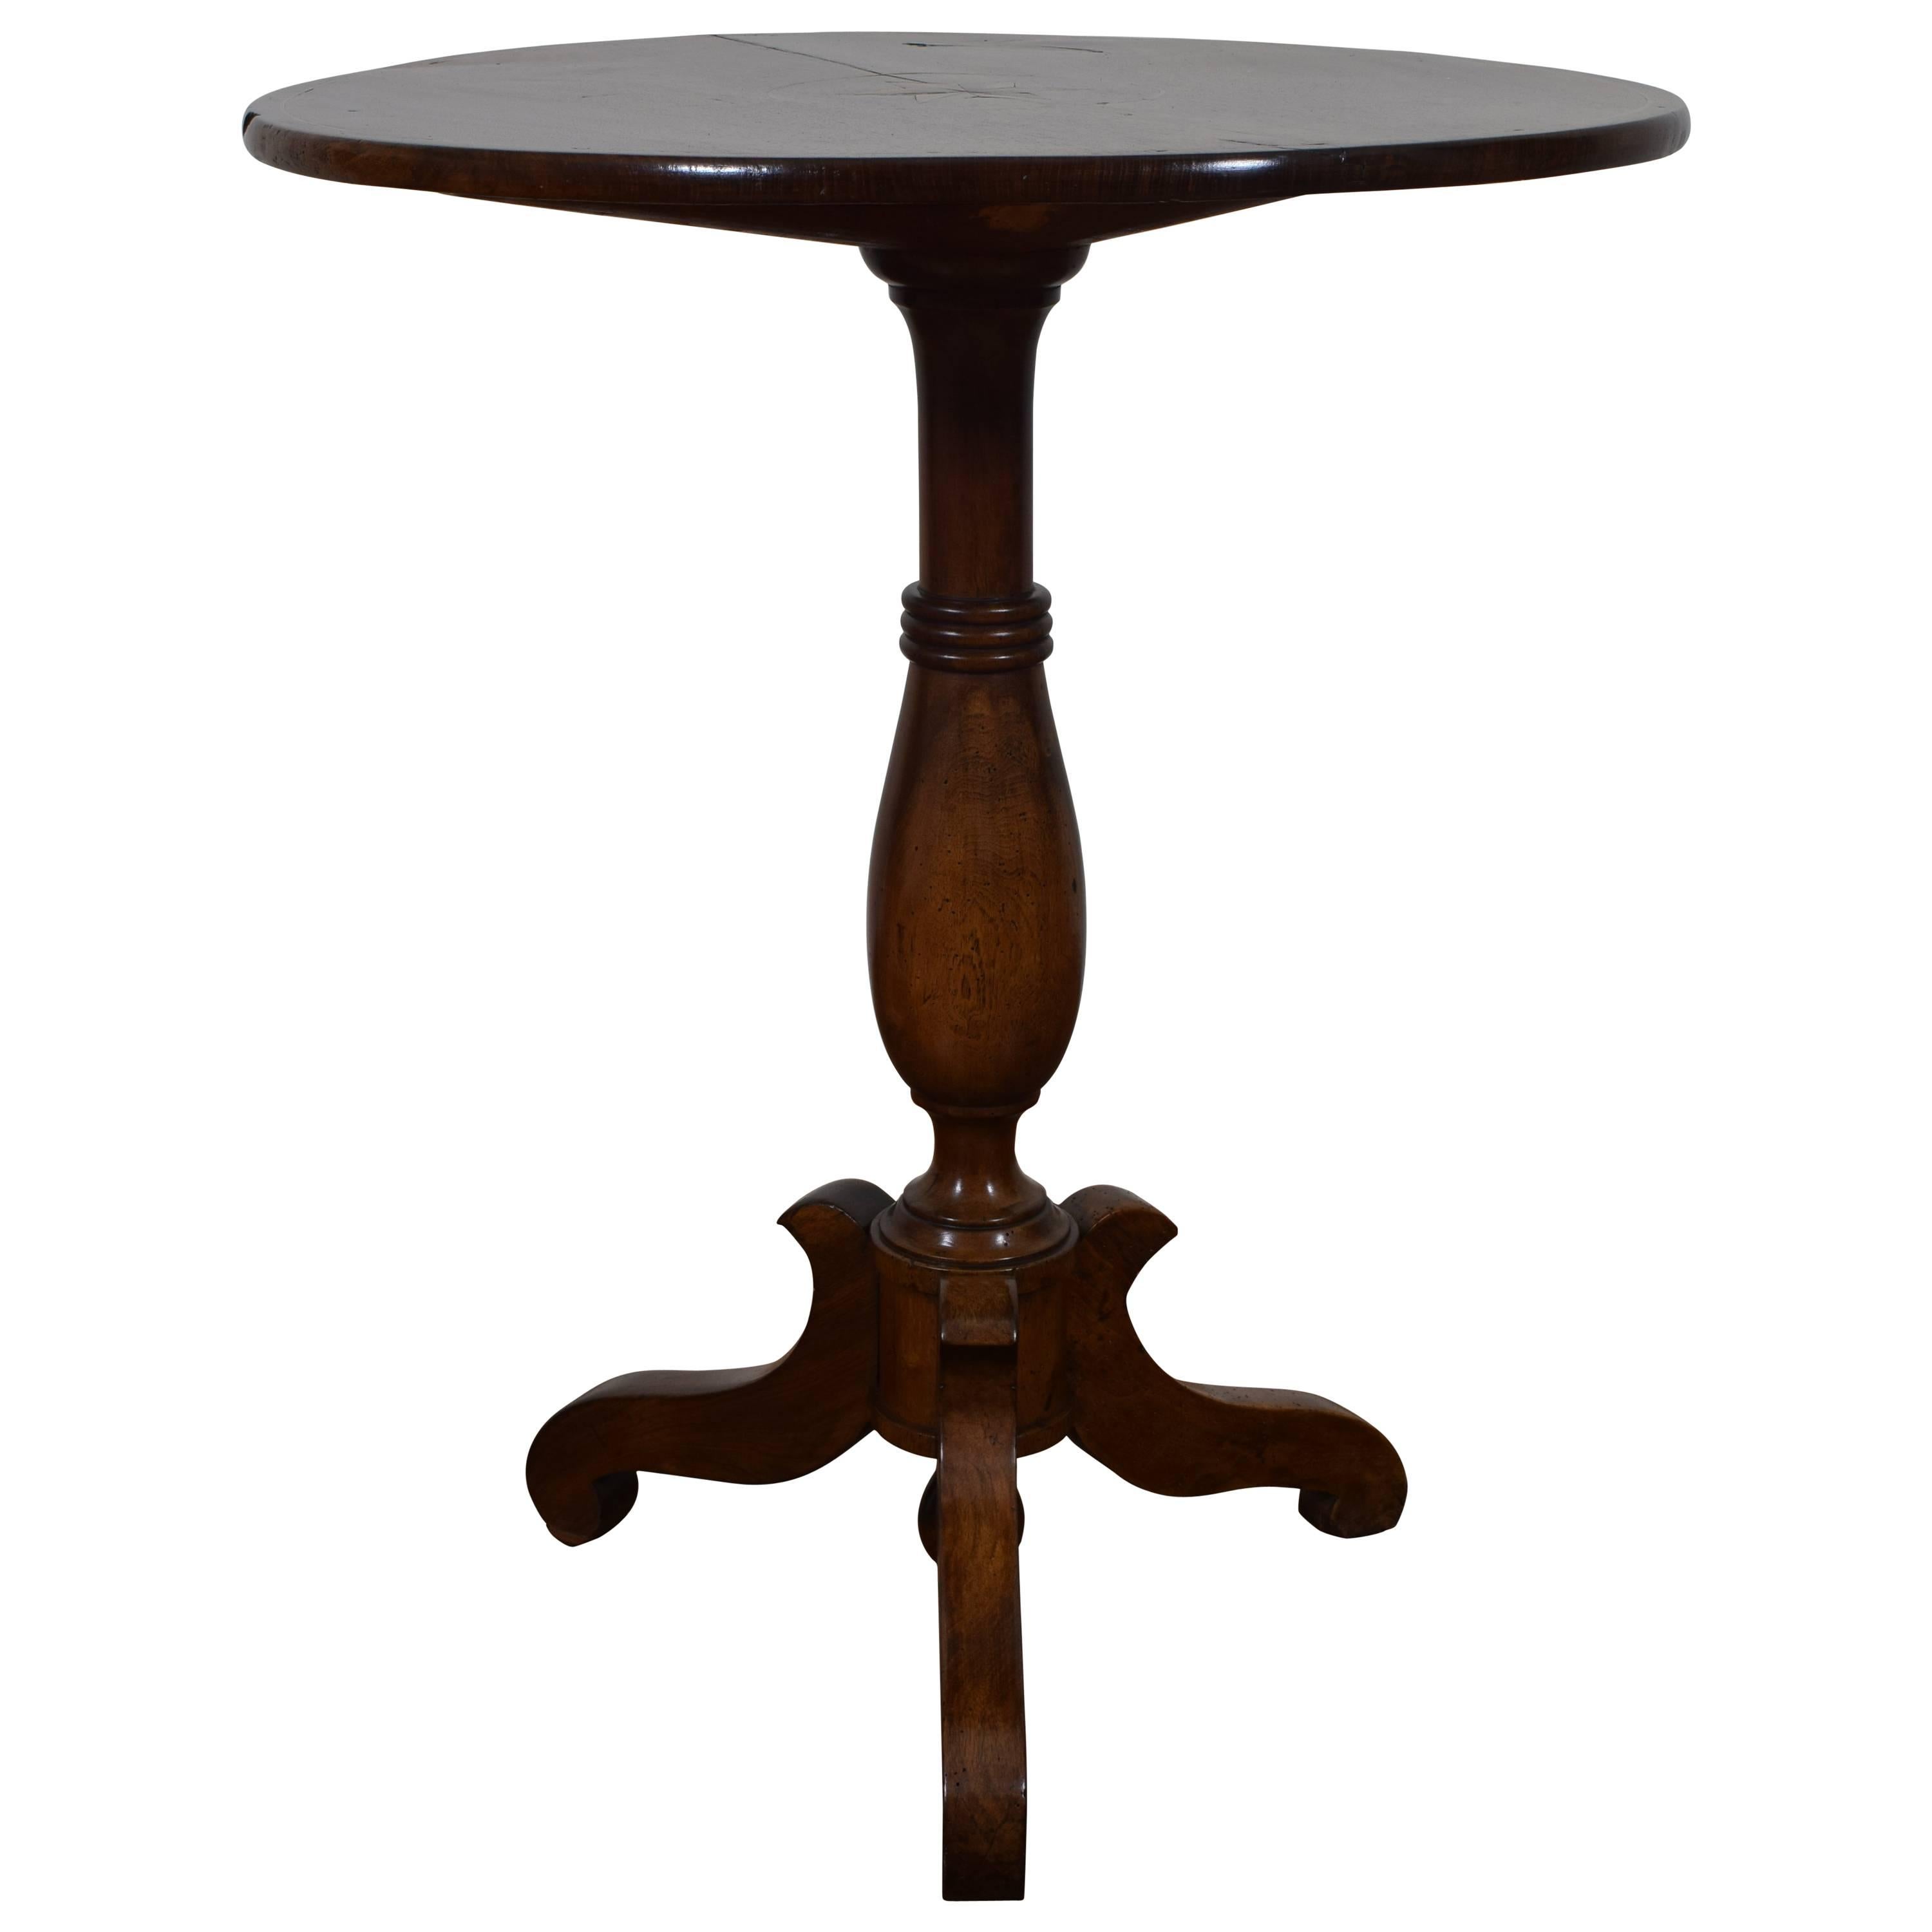 French Louis Philippe Walnut Pedestal Table, Inlaid Top, circa 1840